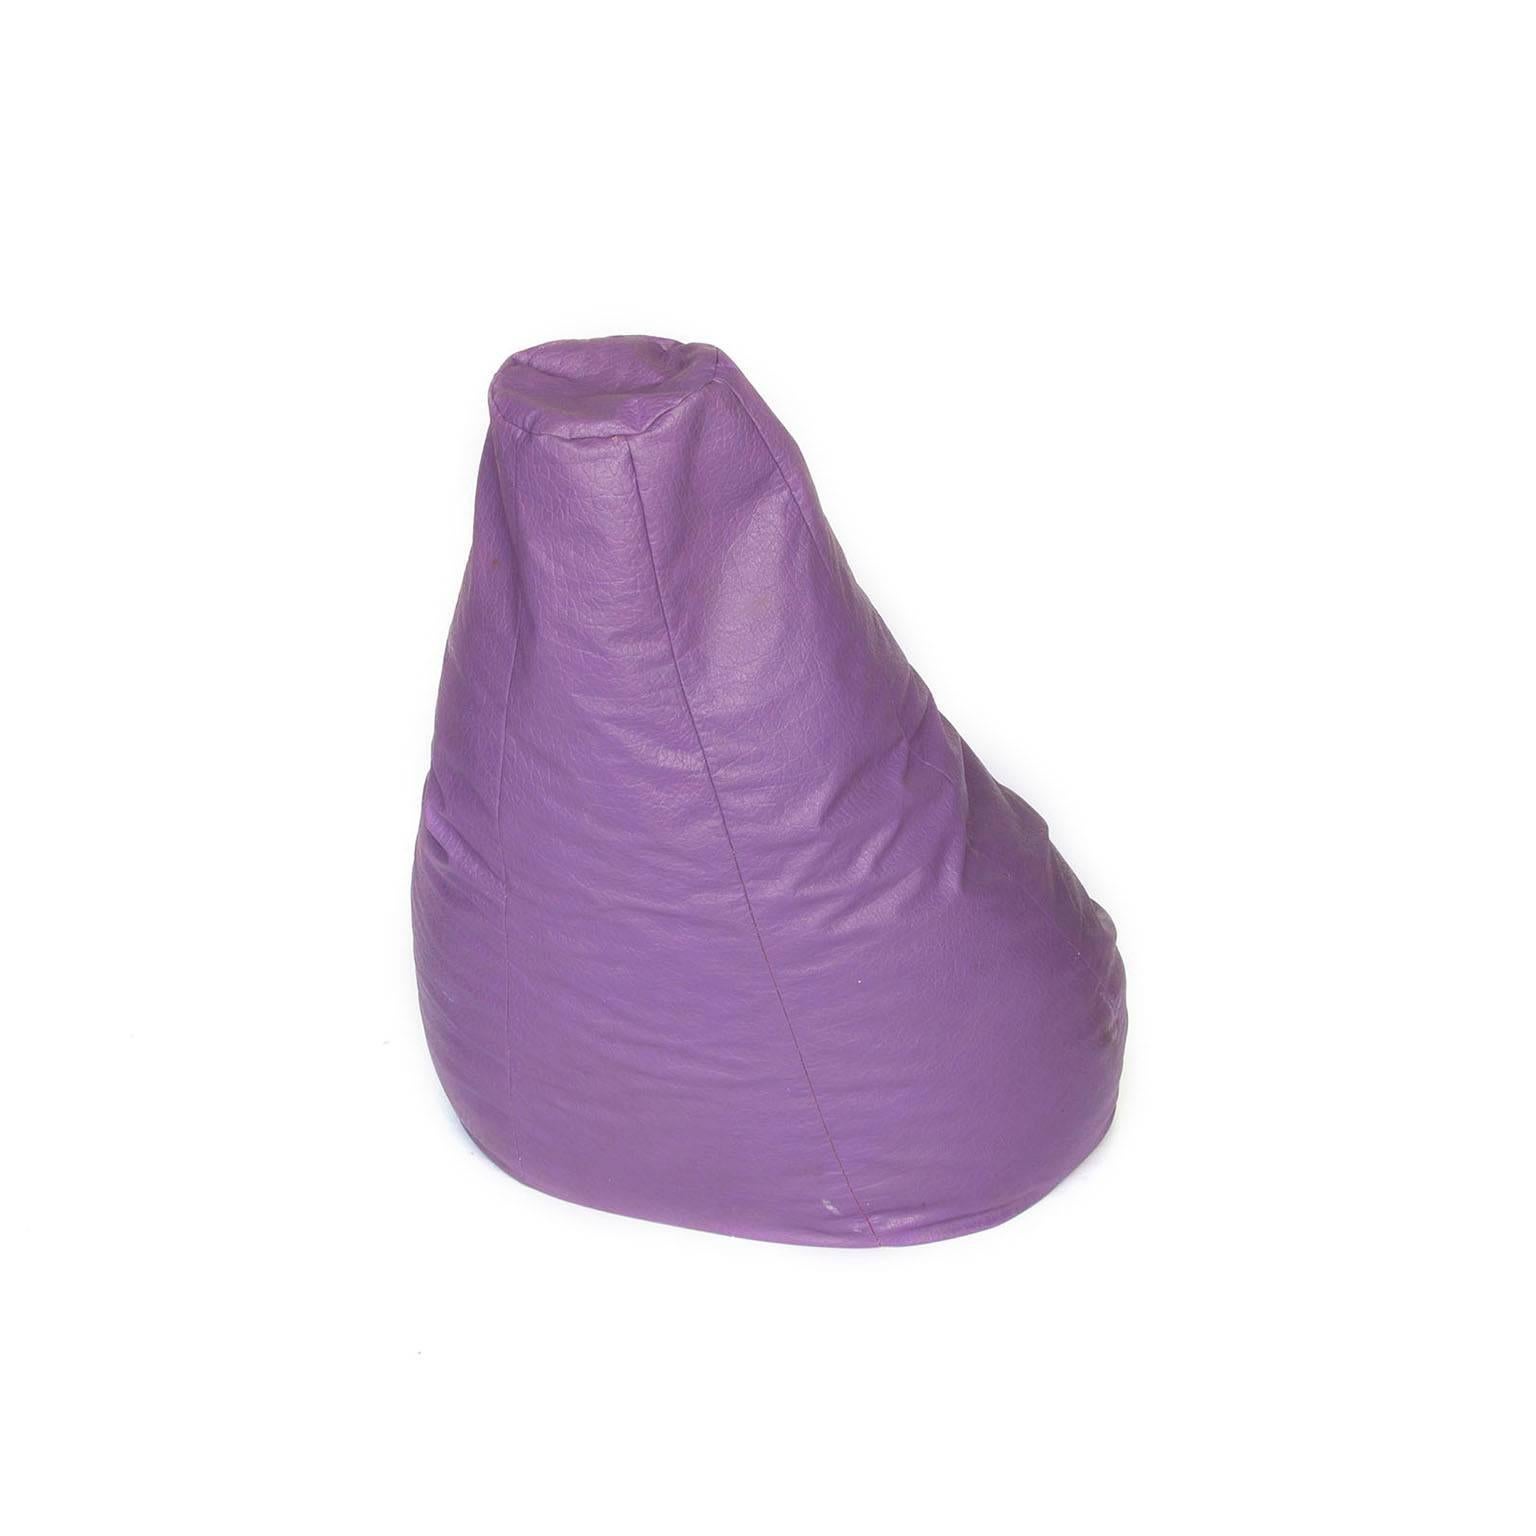 Original European 1960s beanbag or bean bag in purple artificial leather, easily to fit in any convenient form, with f.i. back comfort etcetera to lounge on the floor.

Free shipping for Amsterdam, Haarlem and IJmuiden for lamps, chairs, small items